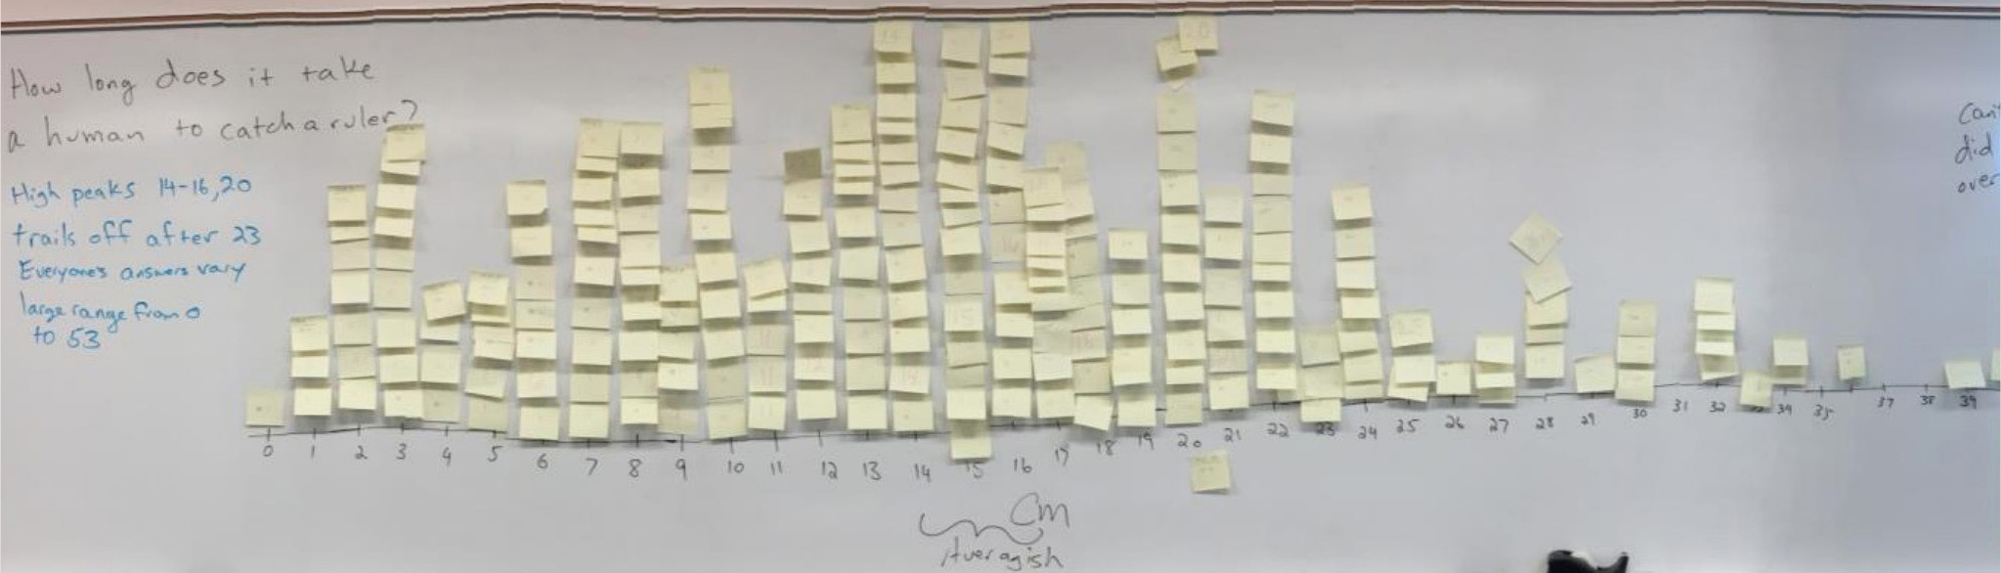 Student-generated data distribution with sticky notes.